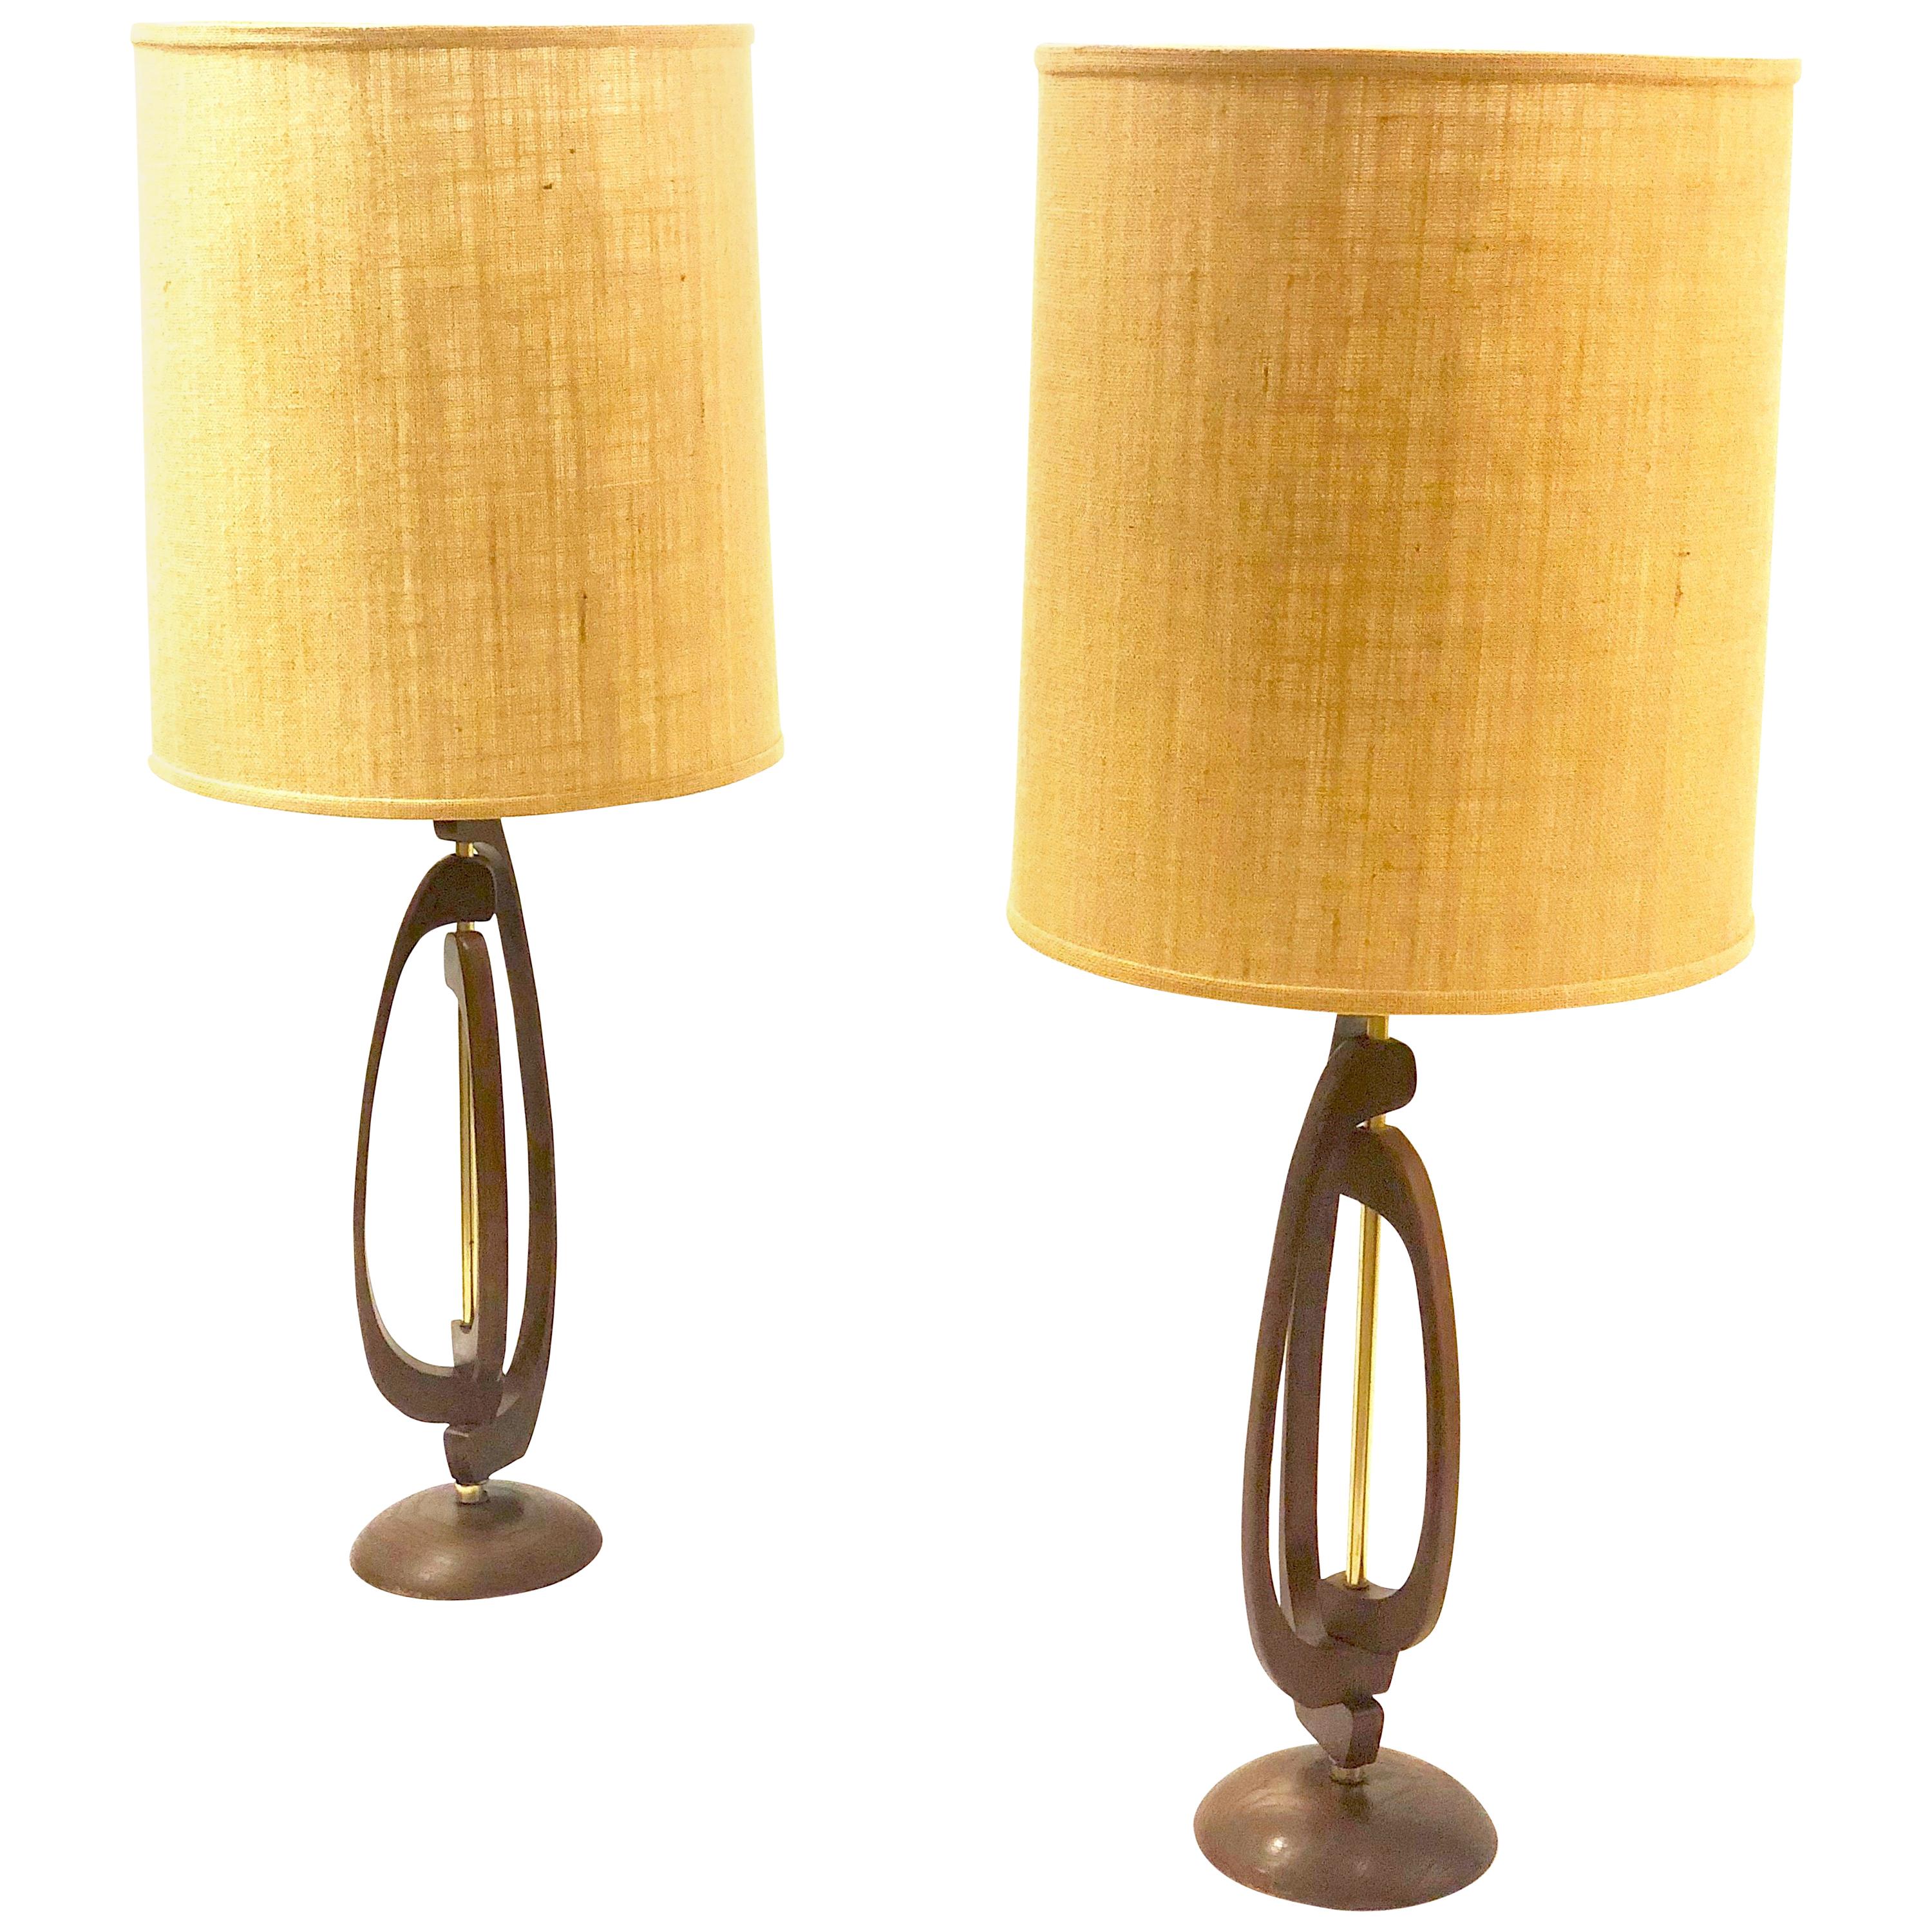 Pair of Mid-Century Modern Table Lamps by Modeline